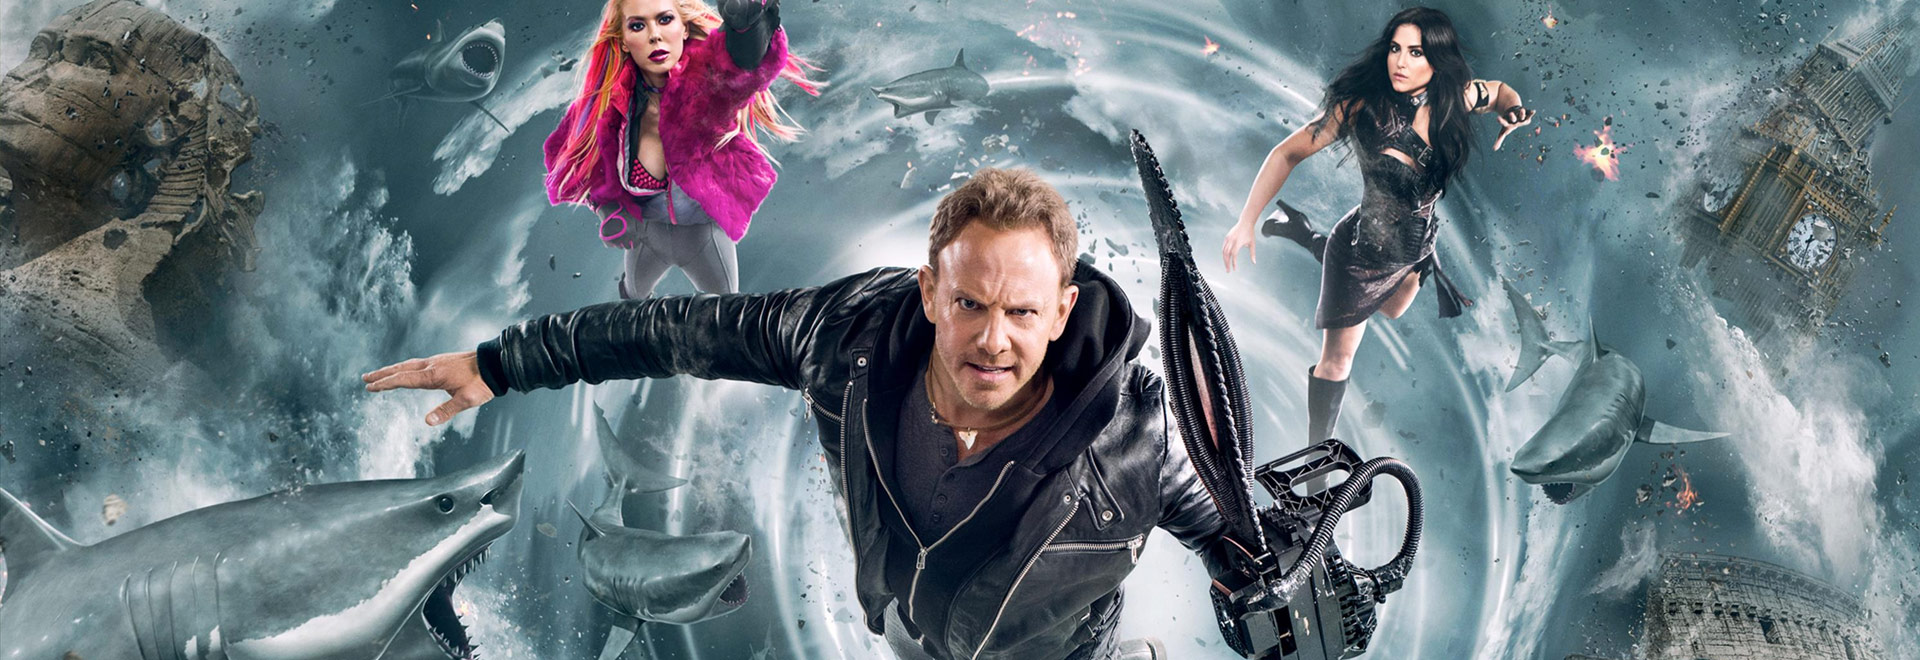 Sharknado 5 - Get ready for global swarming